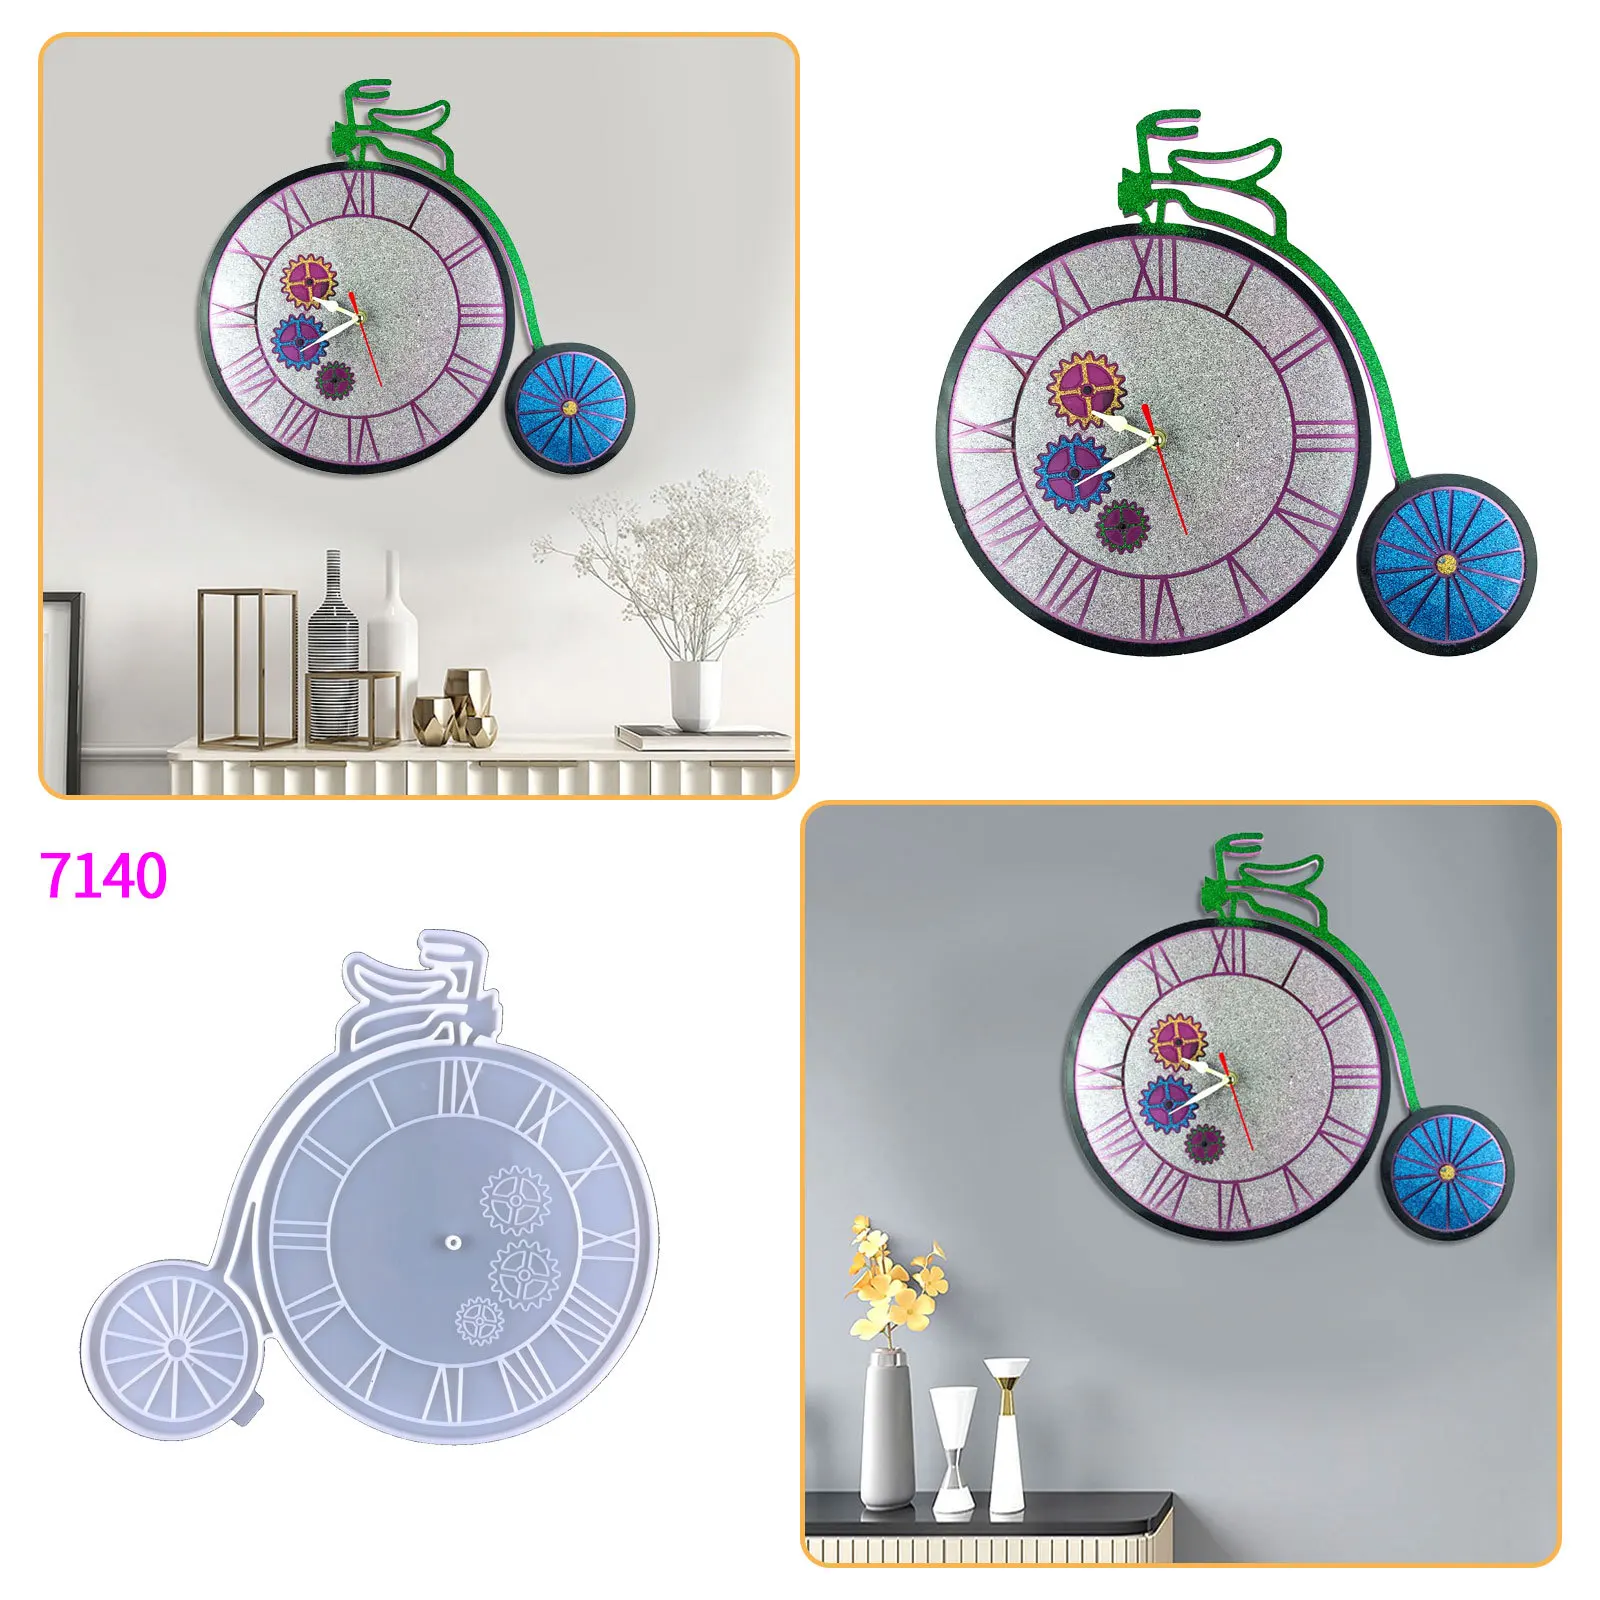 Bicycle Clock Silicone Mold DIY Round Gear Creative Wall Clock Hanging Decoration Mirror Silicone Epoxy Mould For Resin diy art clock epoxy resin silicone mold cat paws wall clock hanging decoration home ornaments craft jewelry mould